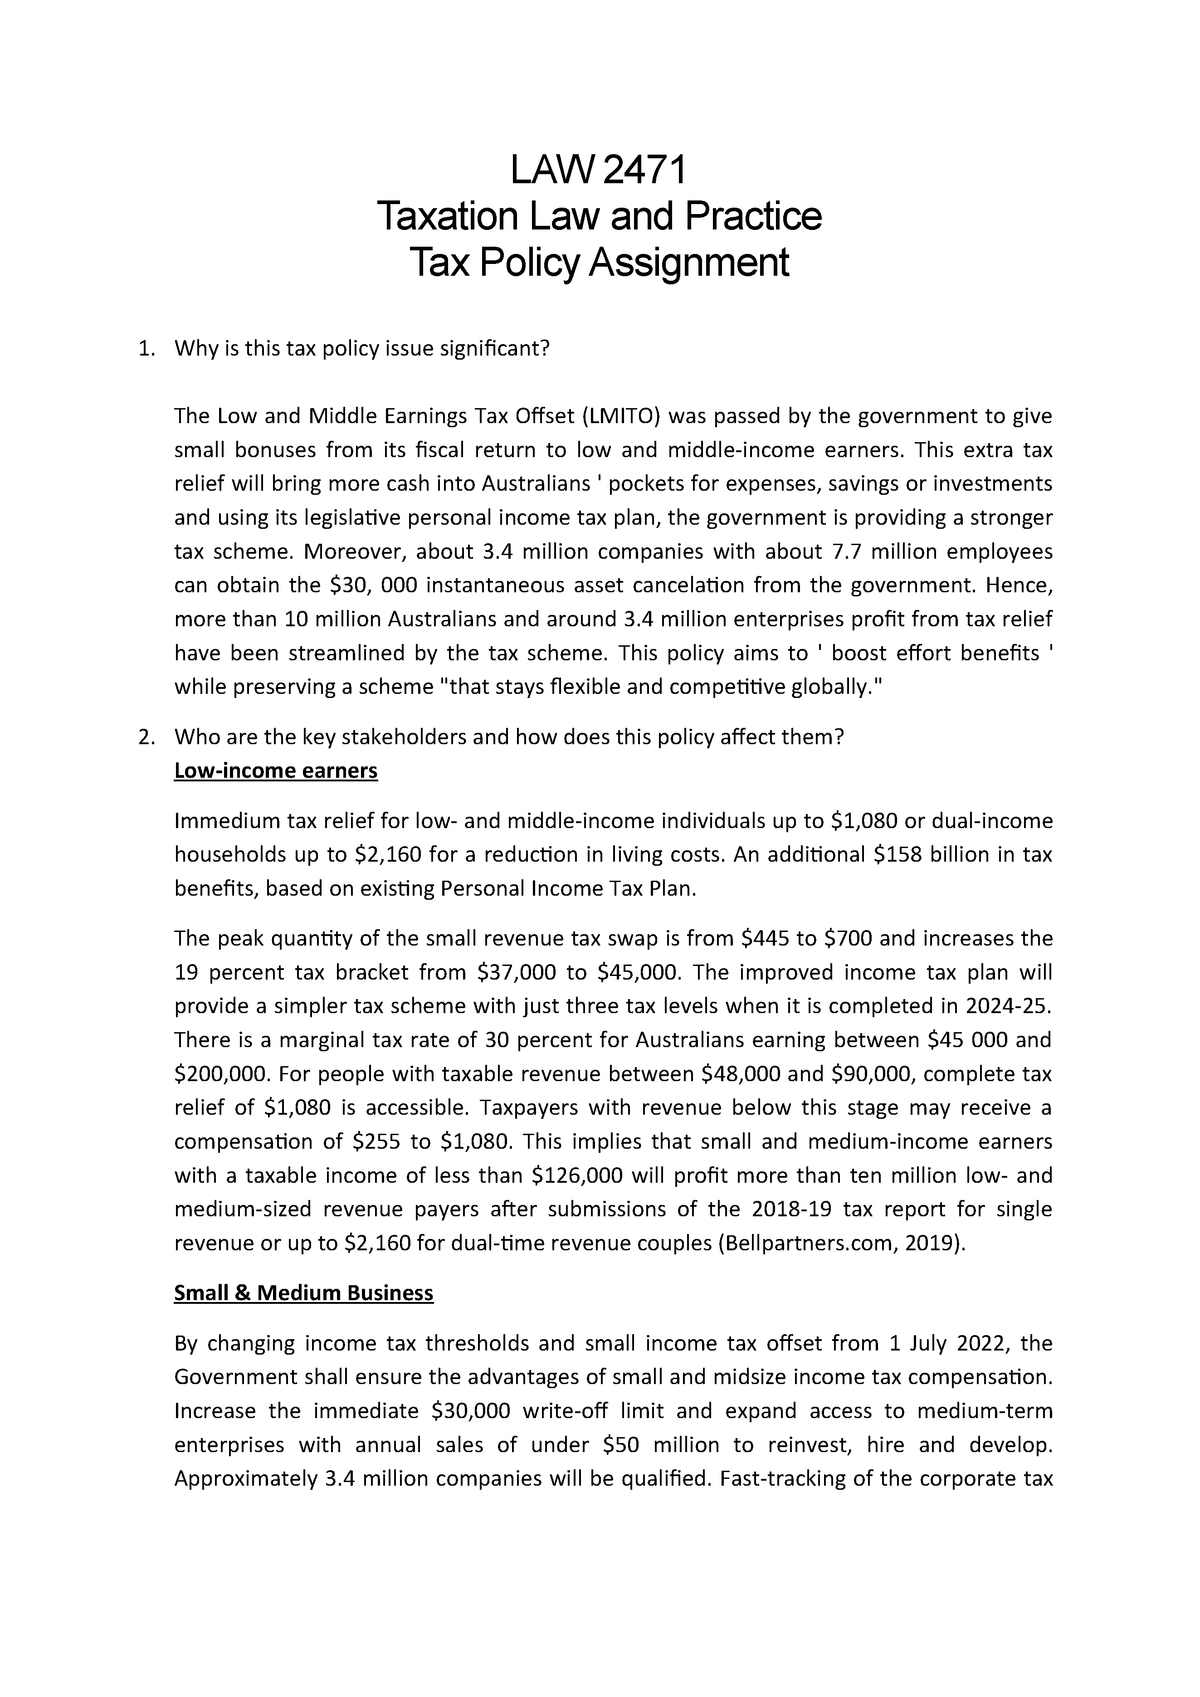 research paper on tax law